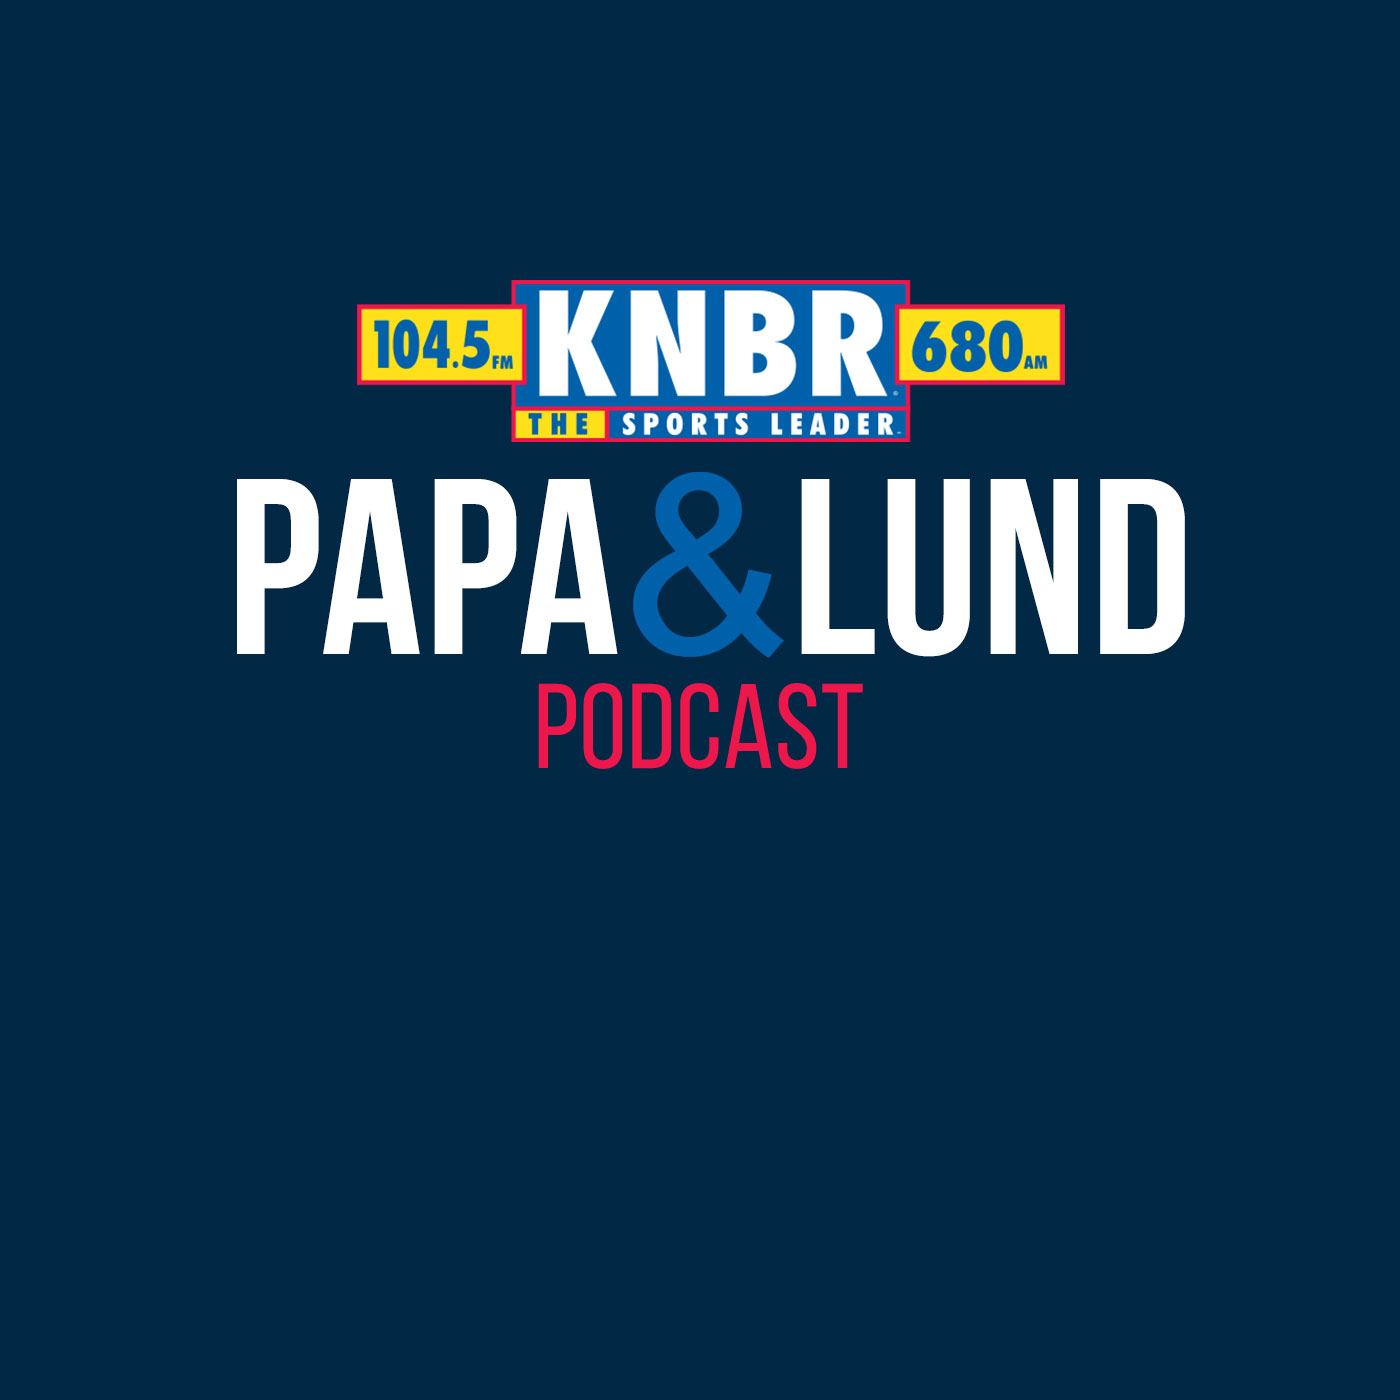 4-23 Papa & Lund Show- Hour 3- Papa & Lund discuss the 49ers draft needs, if Aiyuk or Deebo would be traded this offseason + Interview with Nick Baumgardner